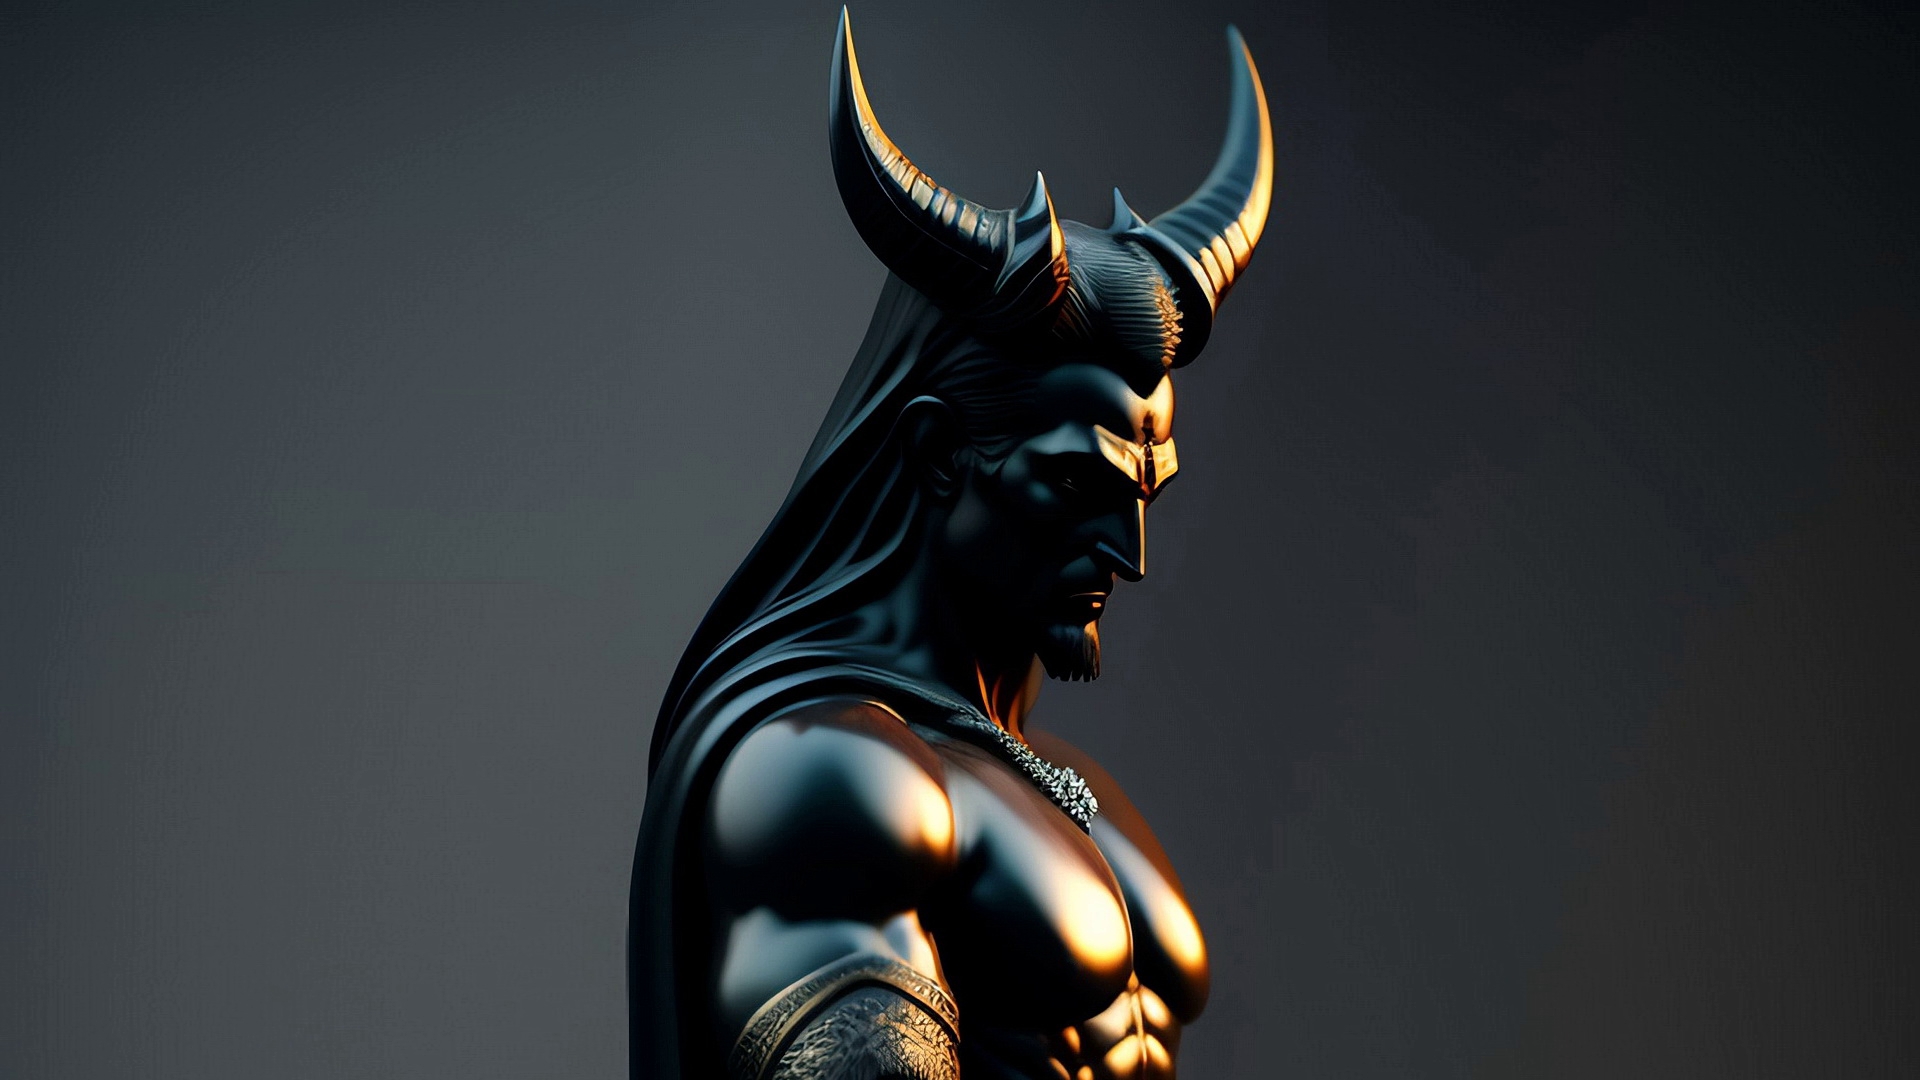 Sculpture of a demon with horns on a gray background